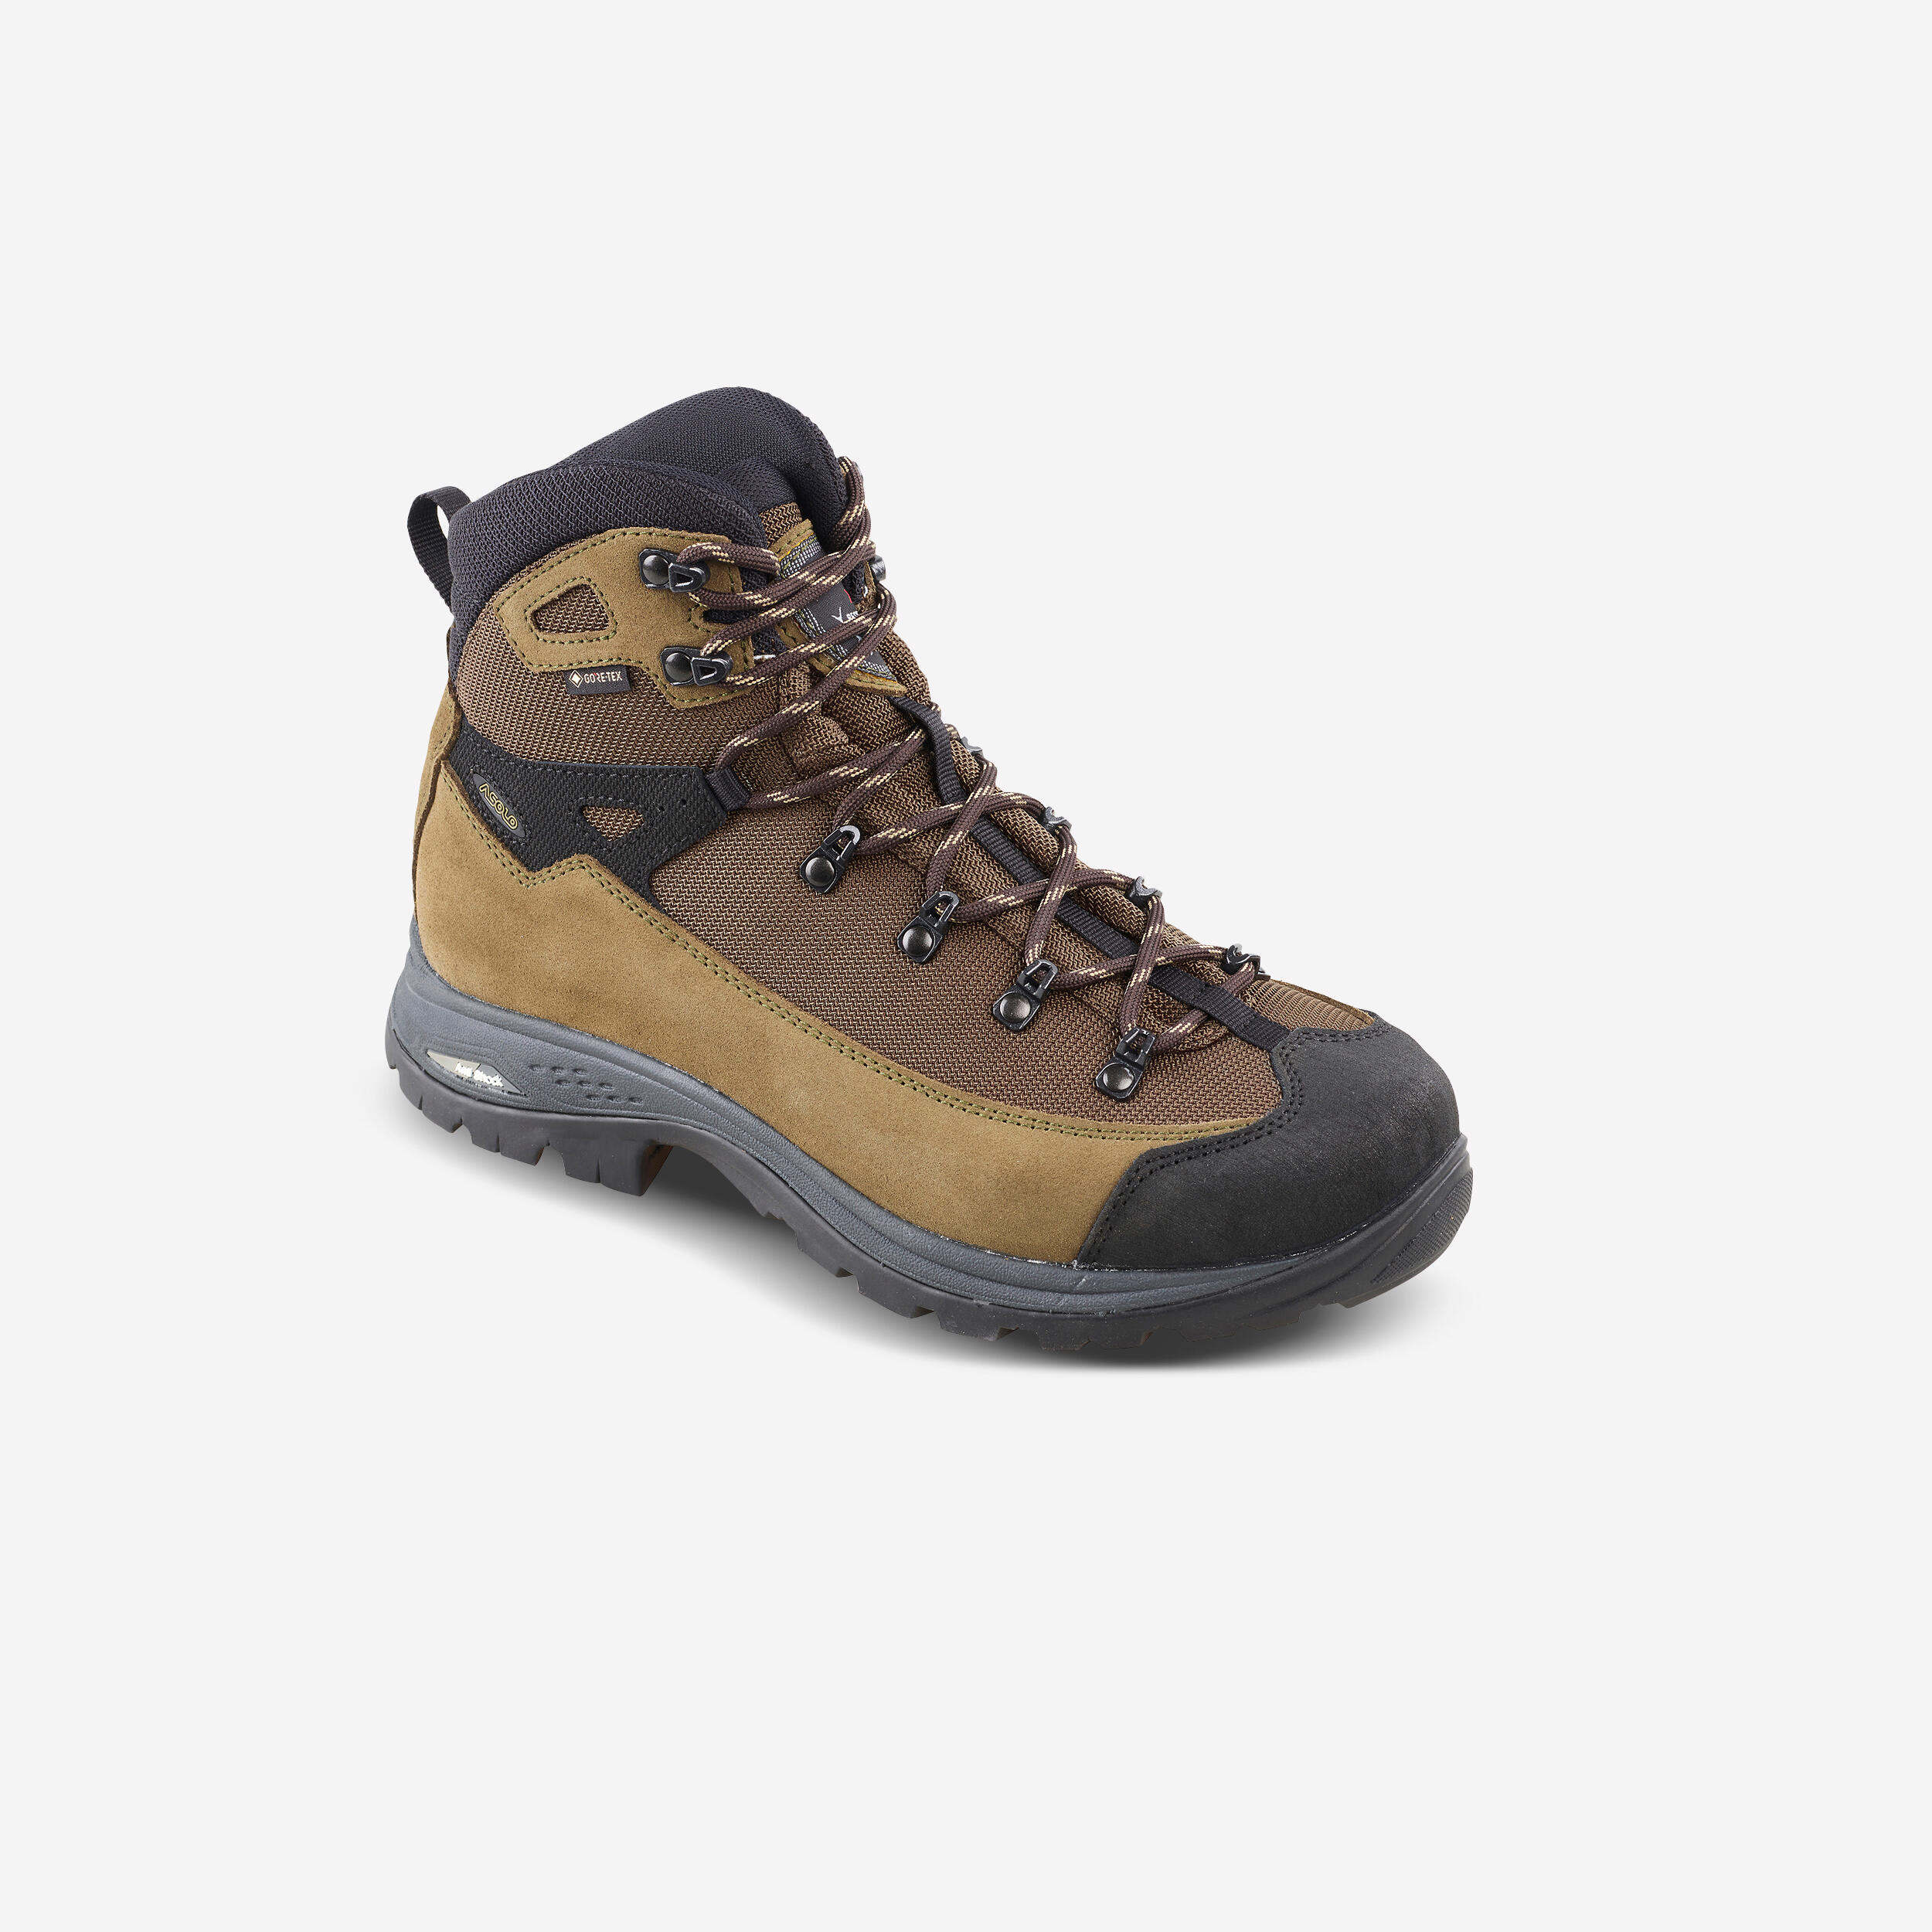 Waterproof Country Sport Boots Asolo X-Hunt Land Gore-Tex Vibram 1/12